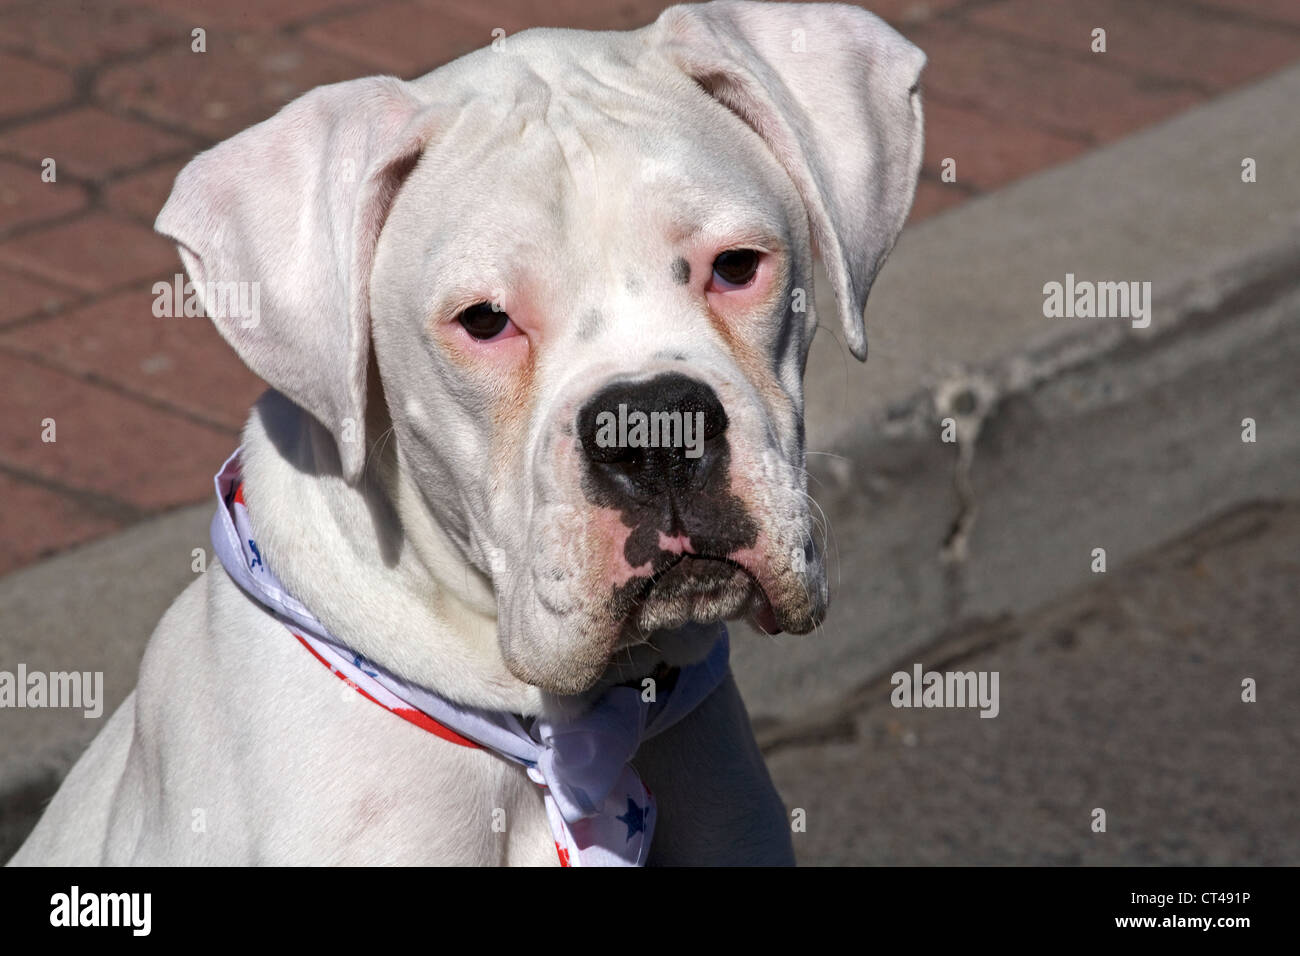 The face of a white boxer dog wearing a scarf. Stock Photo